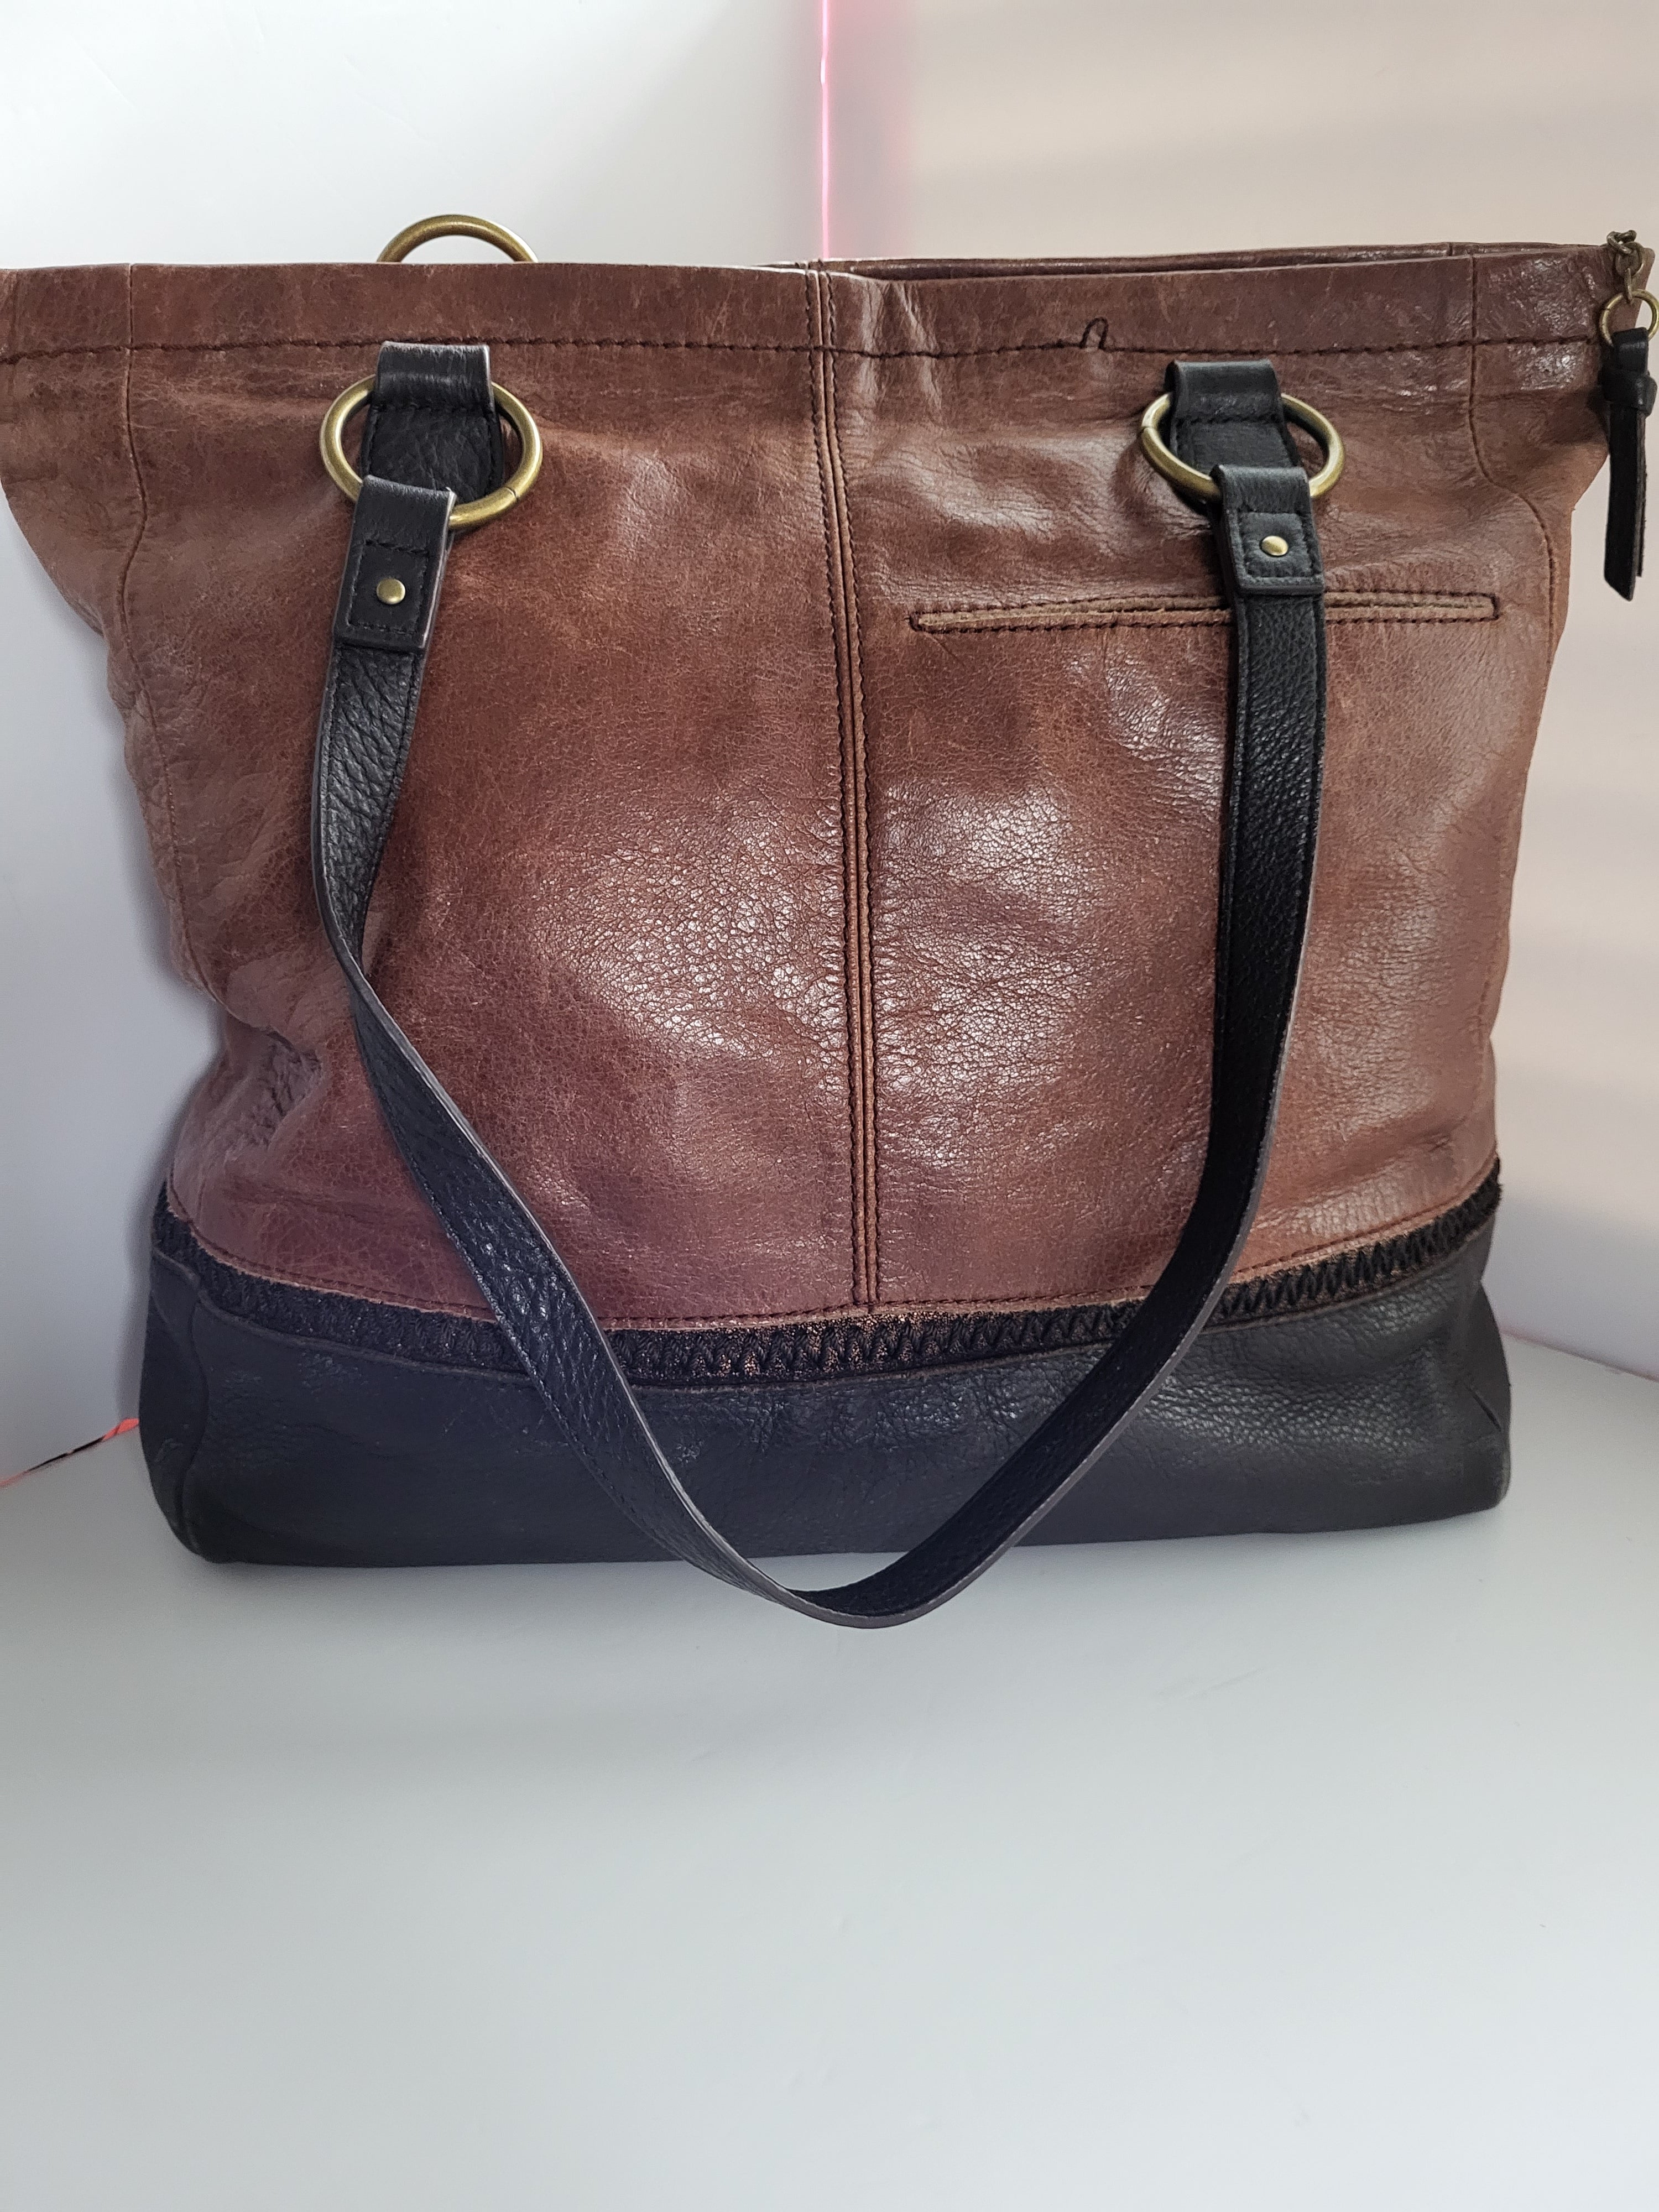 The Sak Two Tone Brown Leather Tote Bag